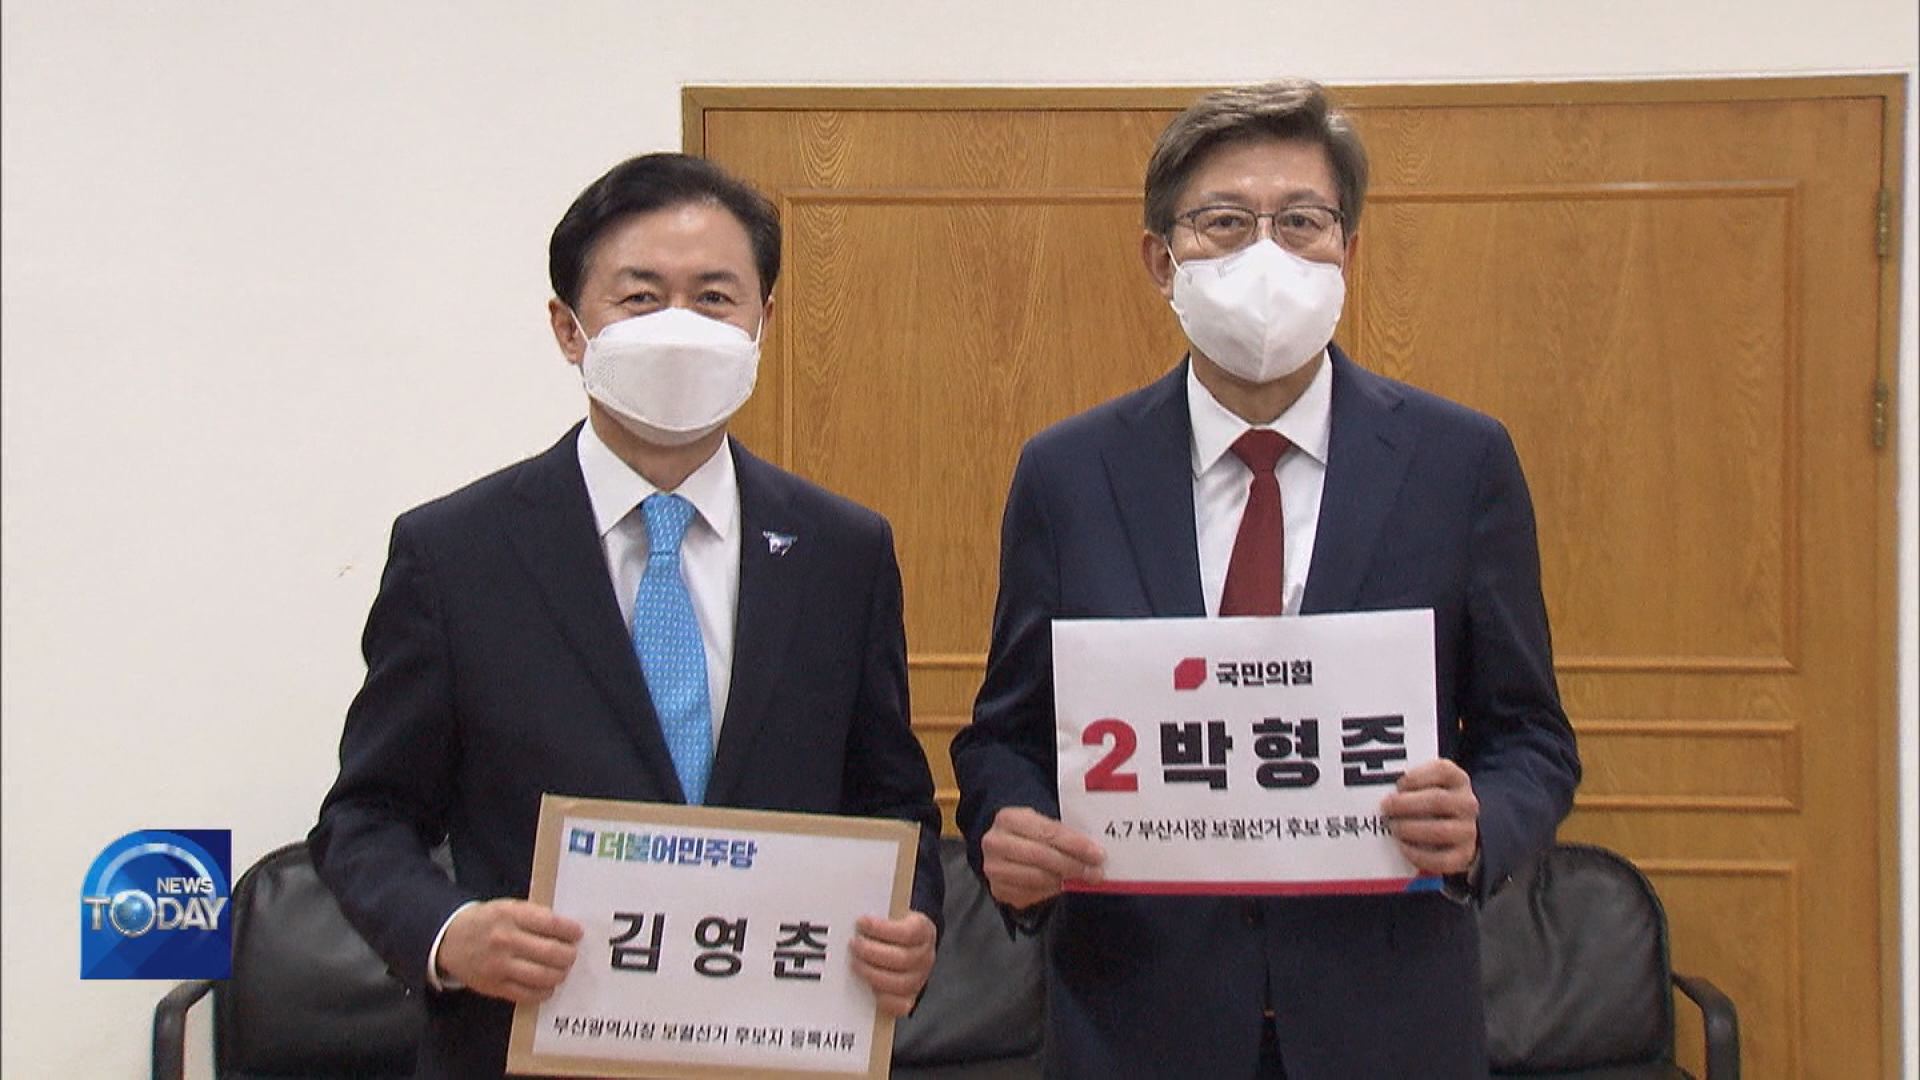 PUBLIC POLL ON BUSAN MAYORAL CANDIDATES